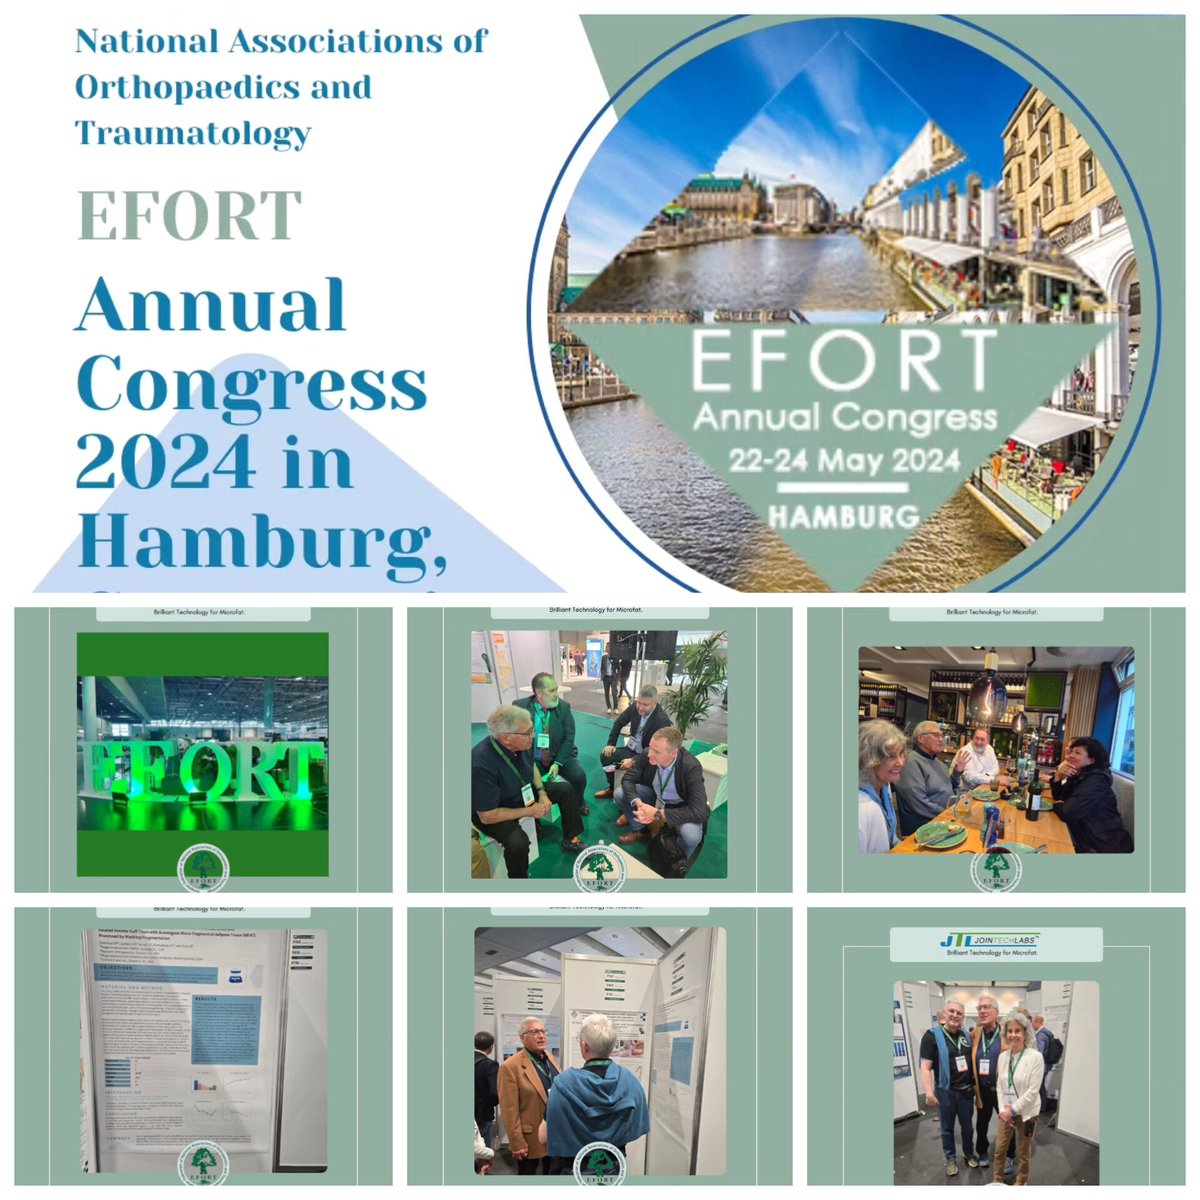 @EFORTnet Annual Congress, Europe’s top orthopaedics and traumatology event!  Thank you, EFORT, for fostering collaboration 
and advancing education and research in our field.

#EFORT2024 #Jointechlabs #Orthopaedics #Traumatology #MedicalInnovation #MINITC #RegenerativeMedicine